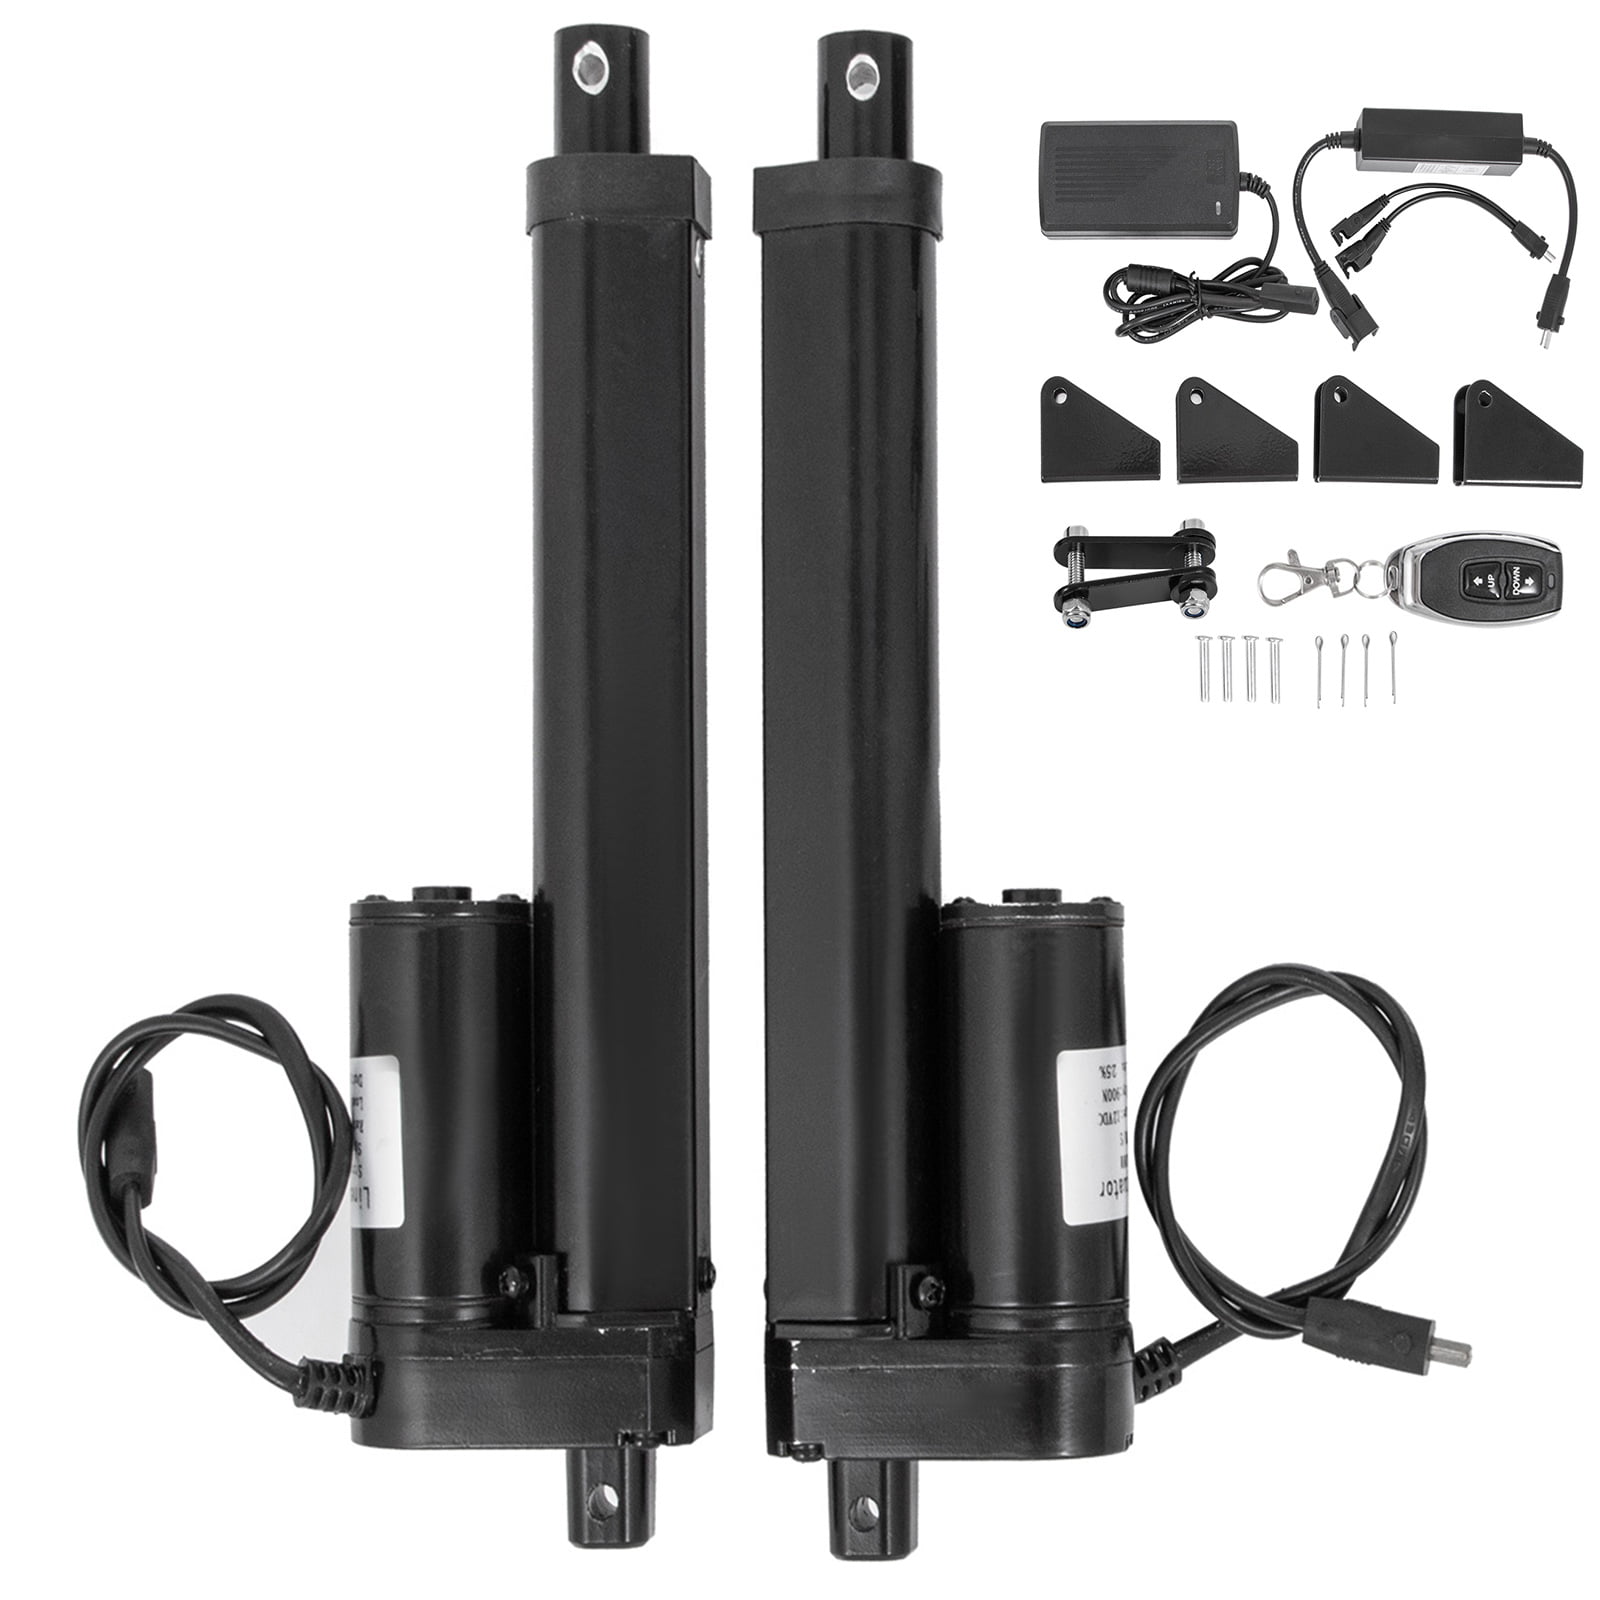 Set of 2 12" 12V Linear Actuator Electric DC Motor Mounting Bracket for ICU Bed 